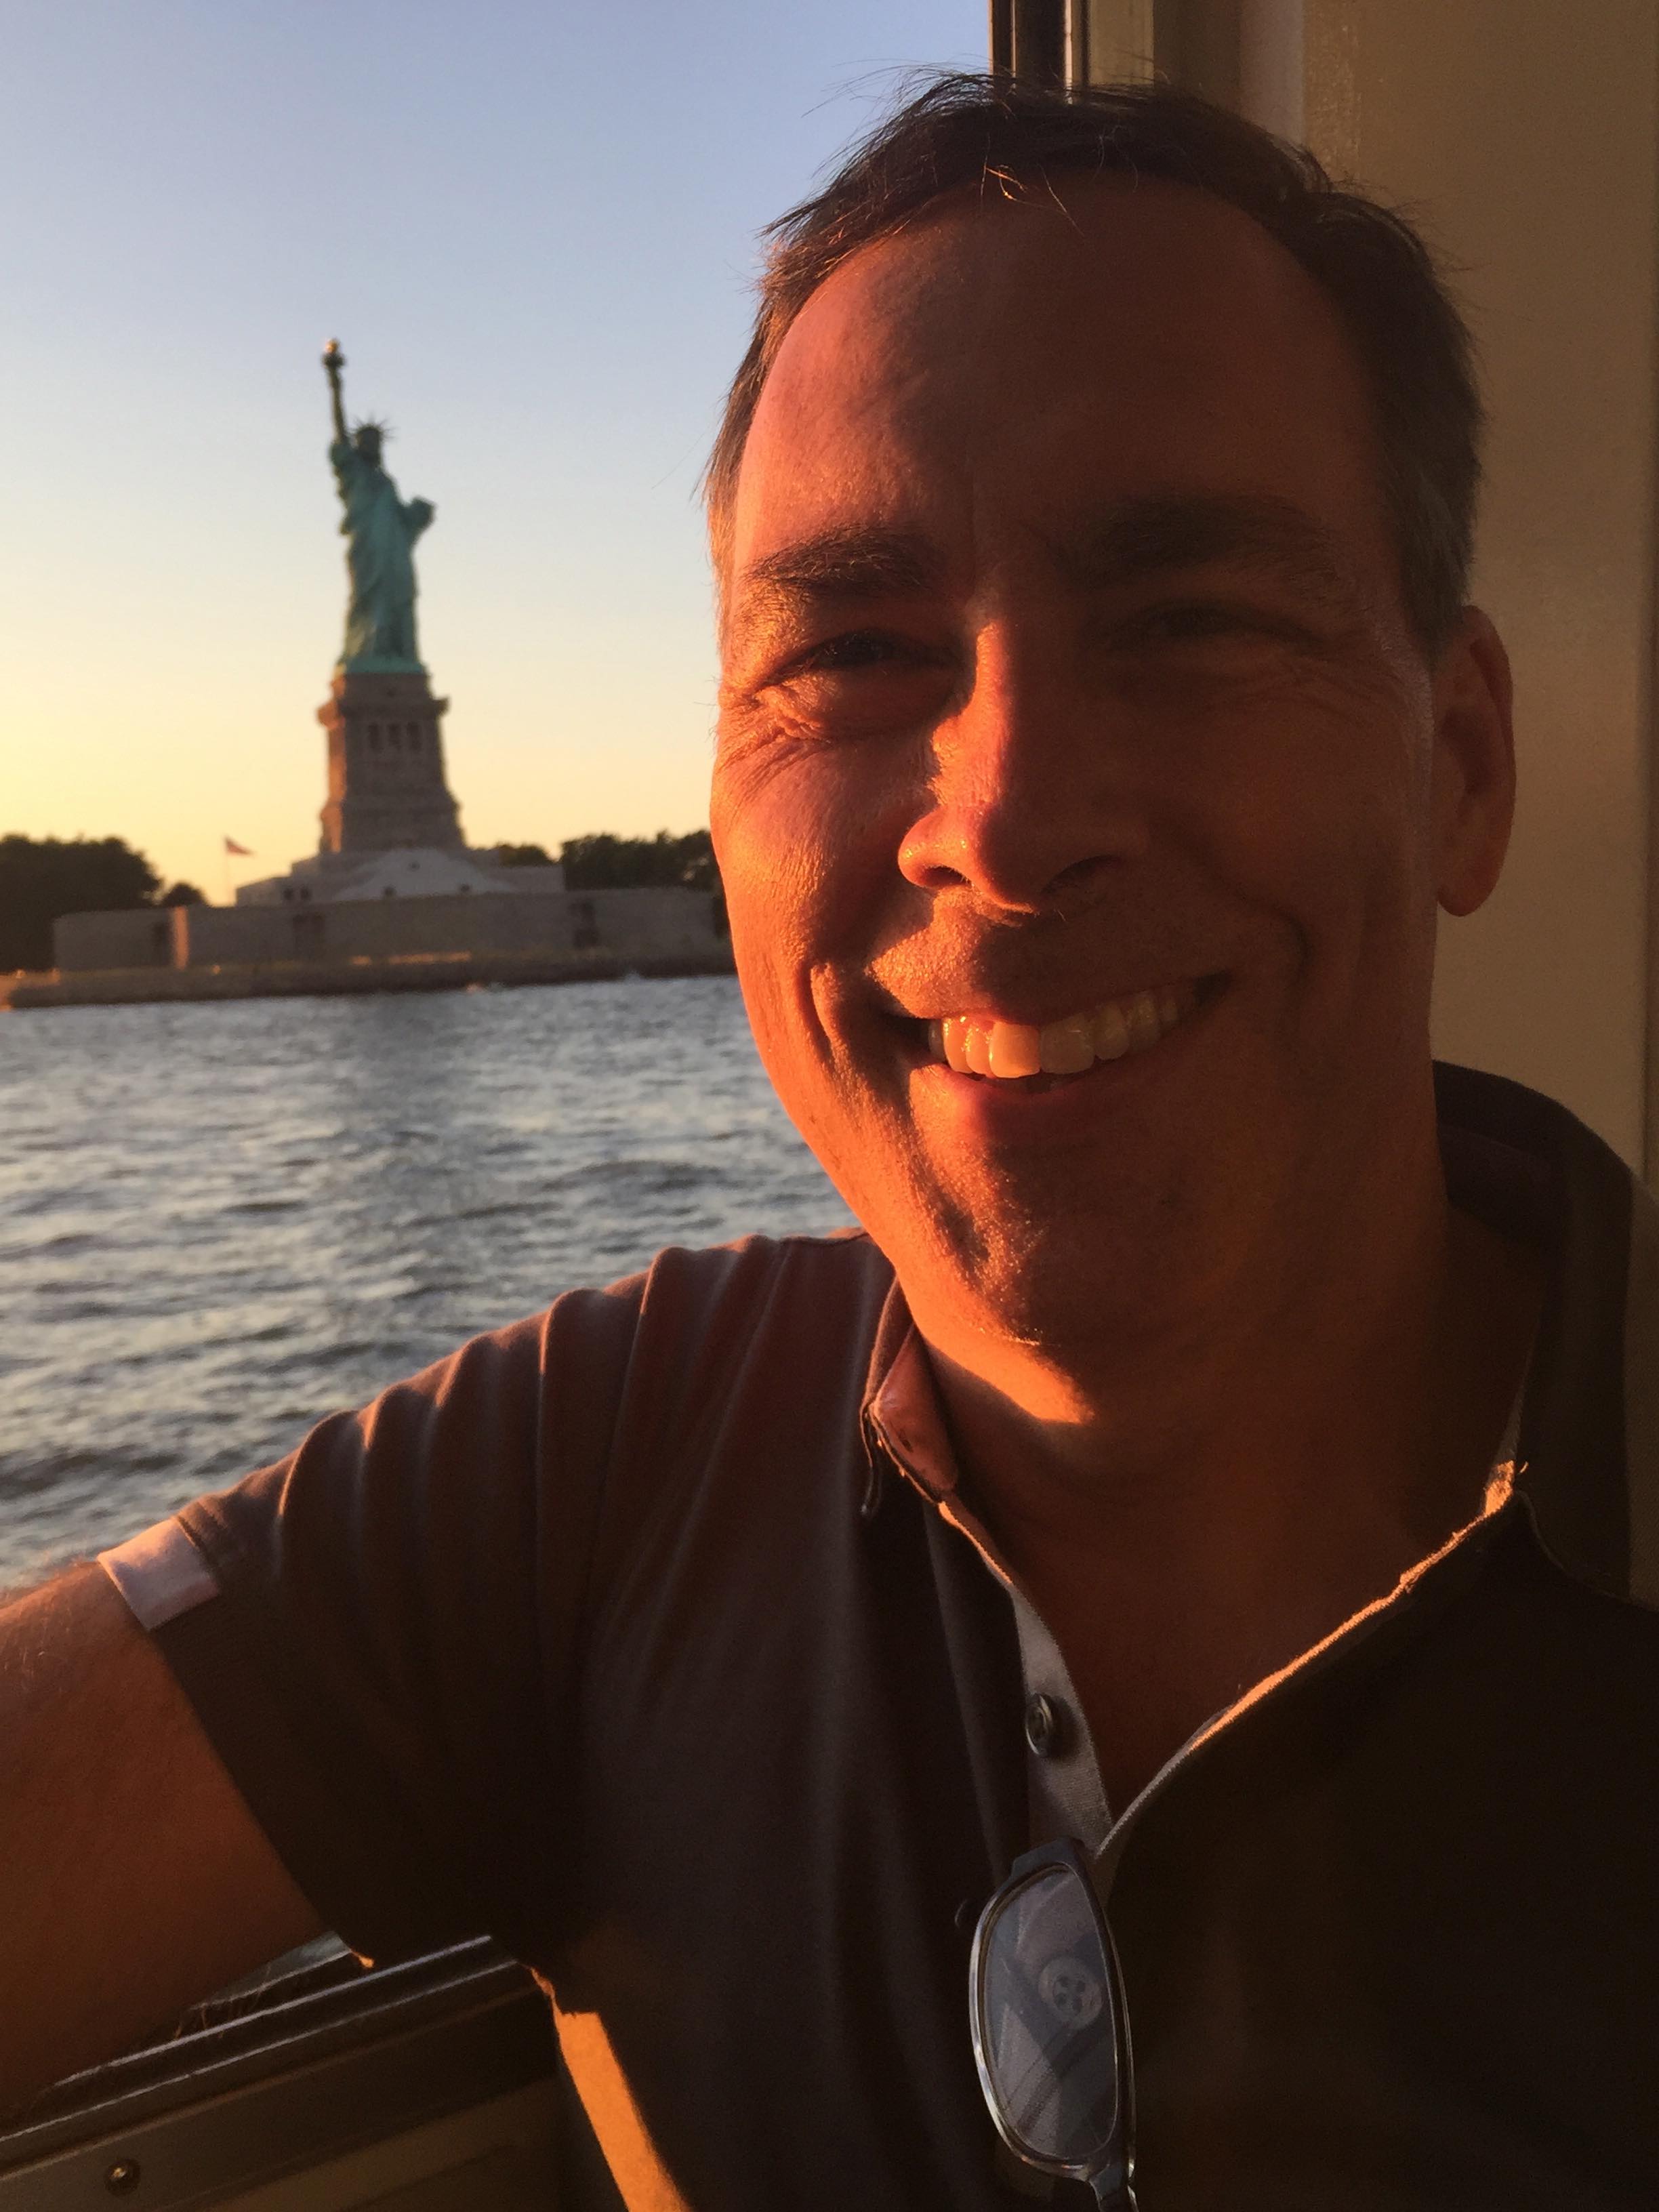 Greg Healy visiting Statue of Liberty